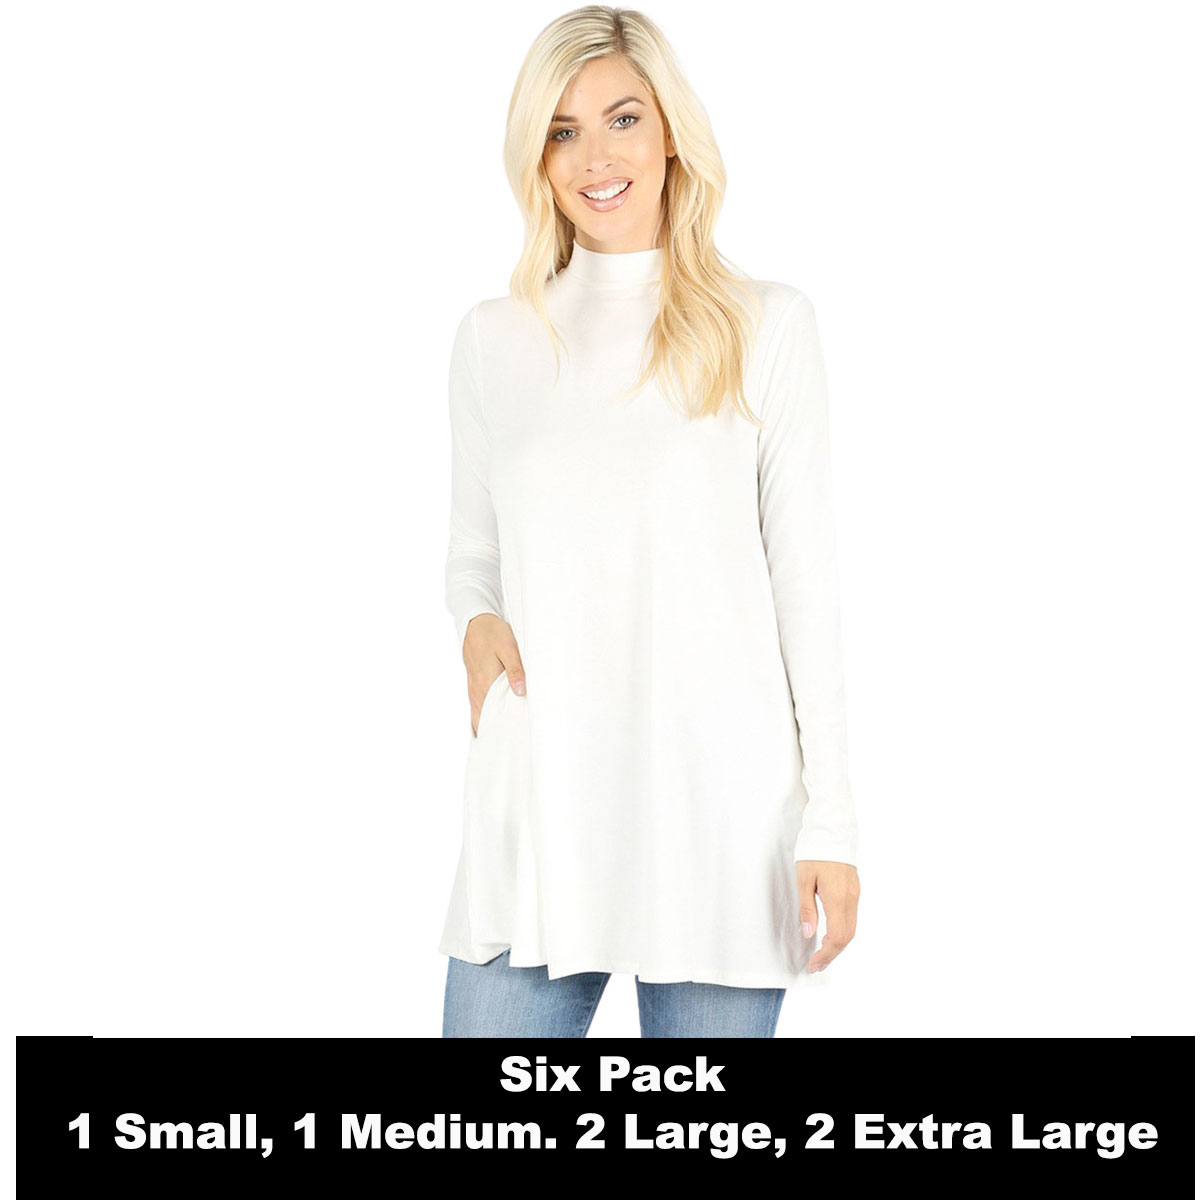  IVORY Mock Turtleneck - Long Sleeve with Pockets 1641 SIX PACK (1S/1M/2L/2XL)/